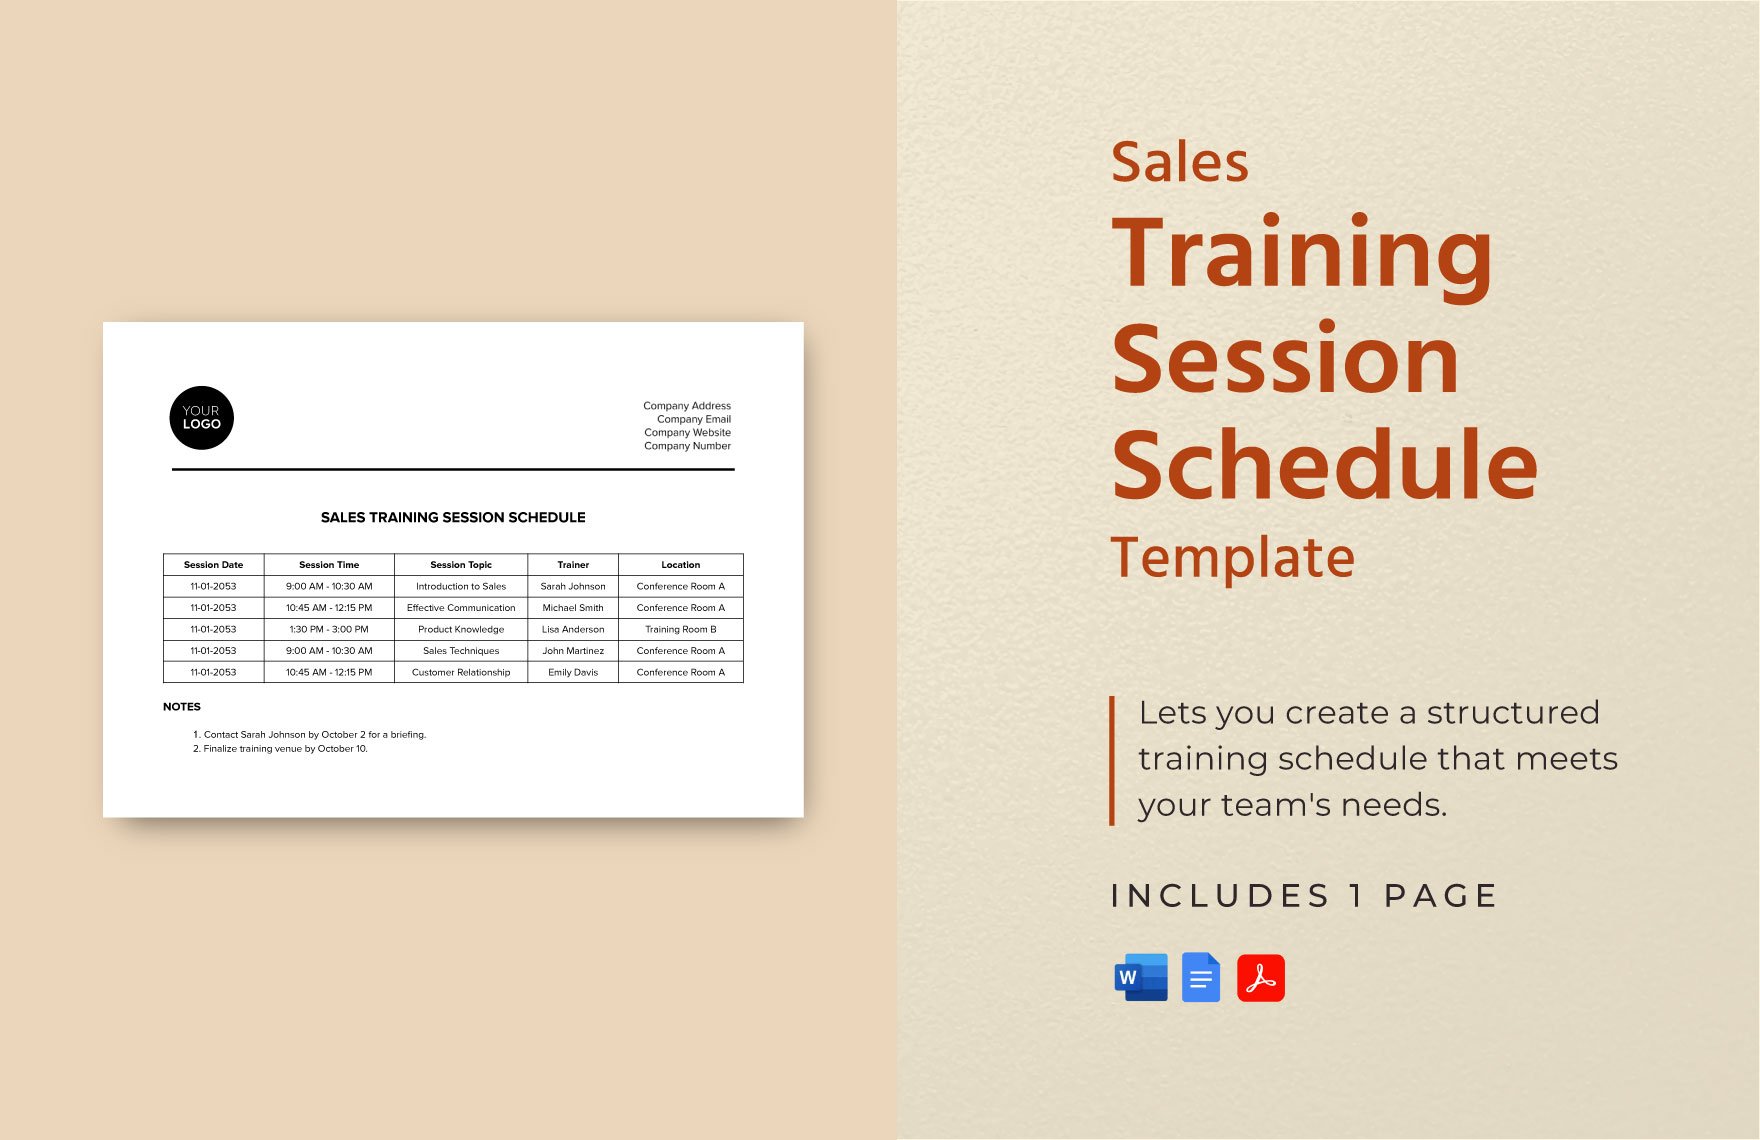 Sales Training Session Schedule Template in Word, Google Docs, PDF